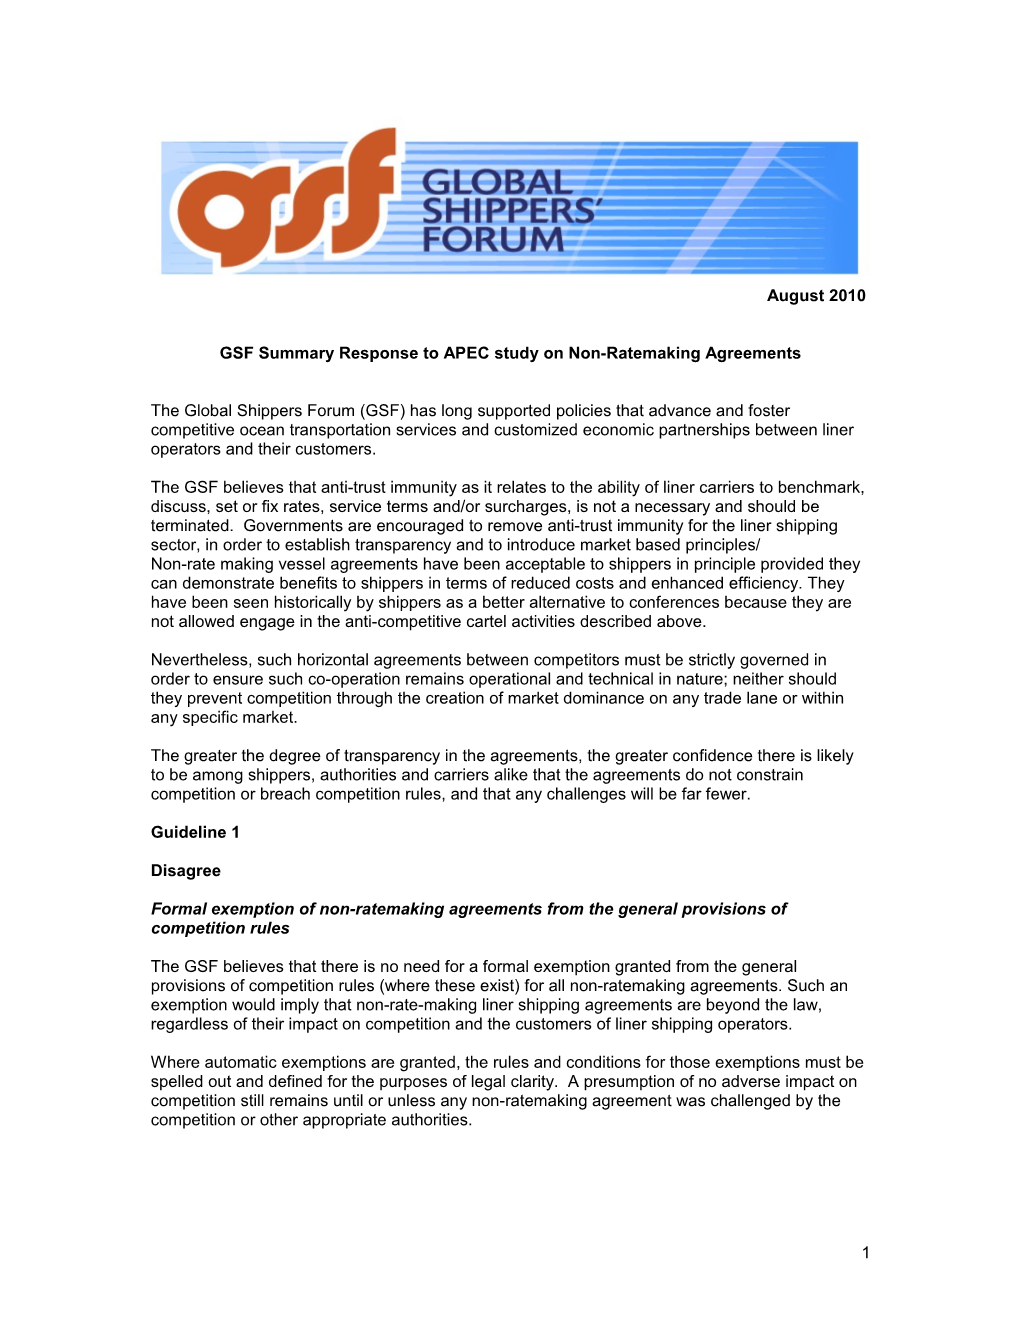 GSF Summary Response to APEC Study on Non-Ratemaking Agreements